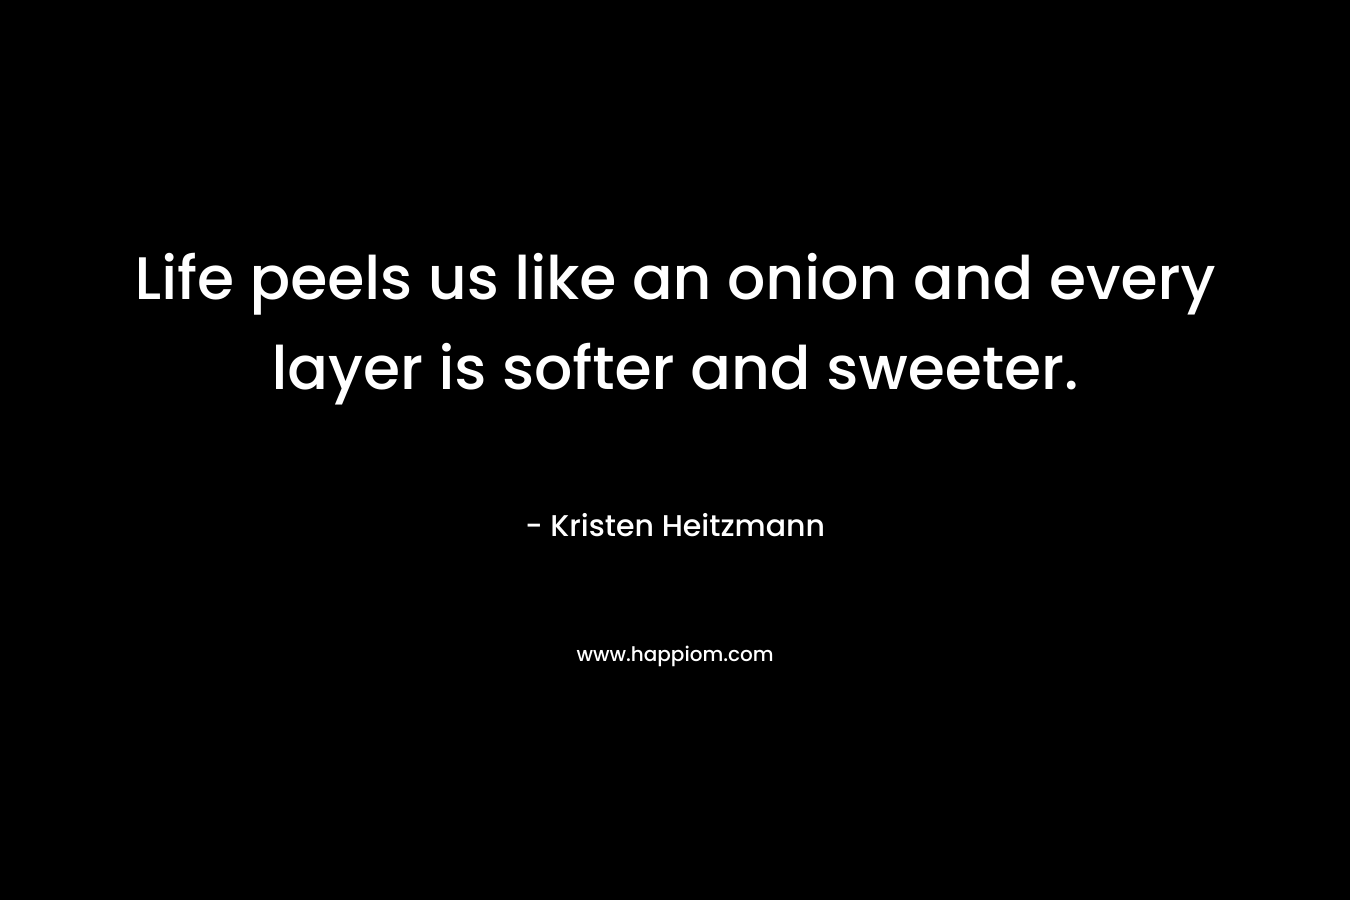 Life peels us like an onion and every layer is softer and sweeter. – Kristen Heitzmann